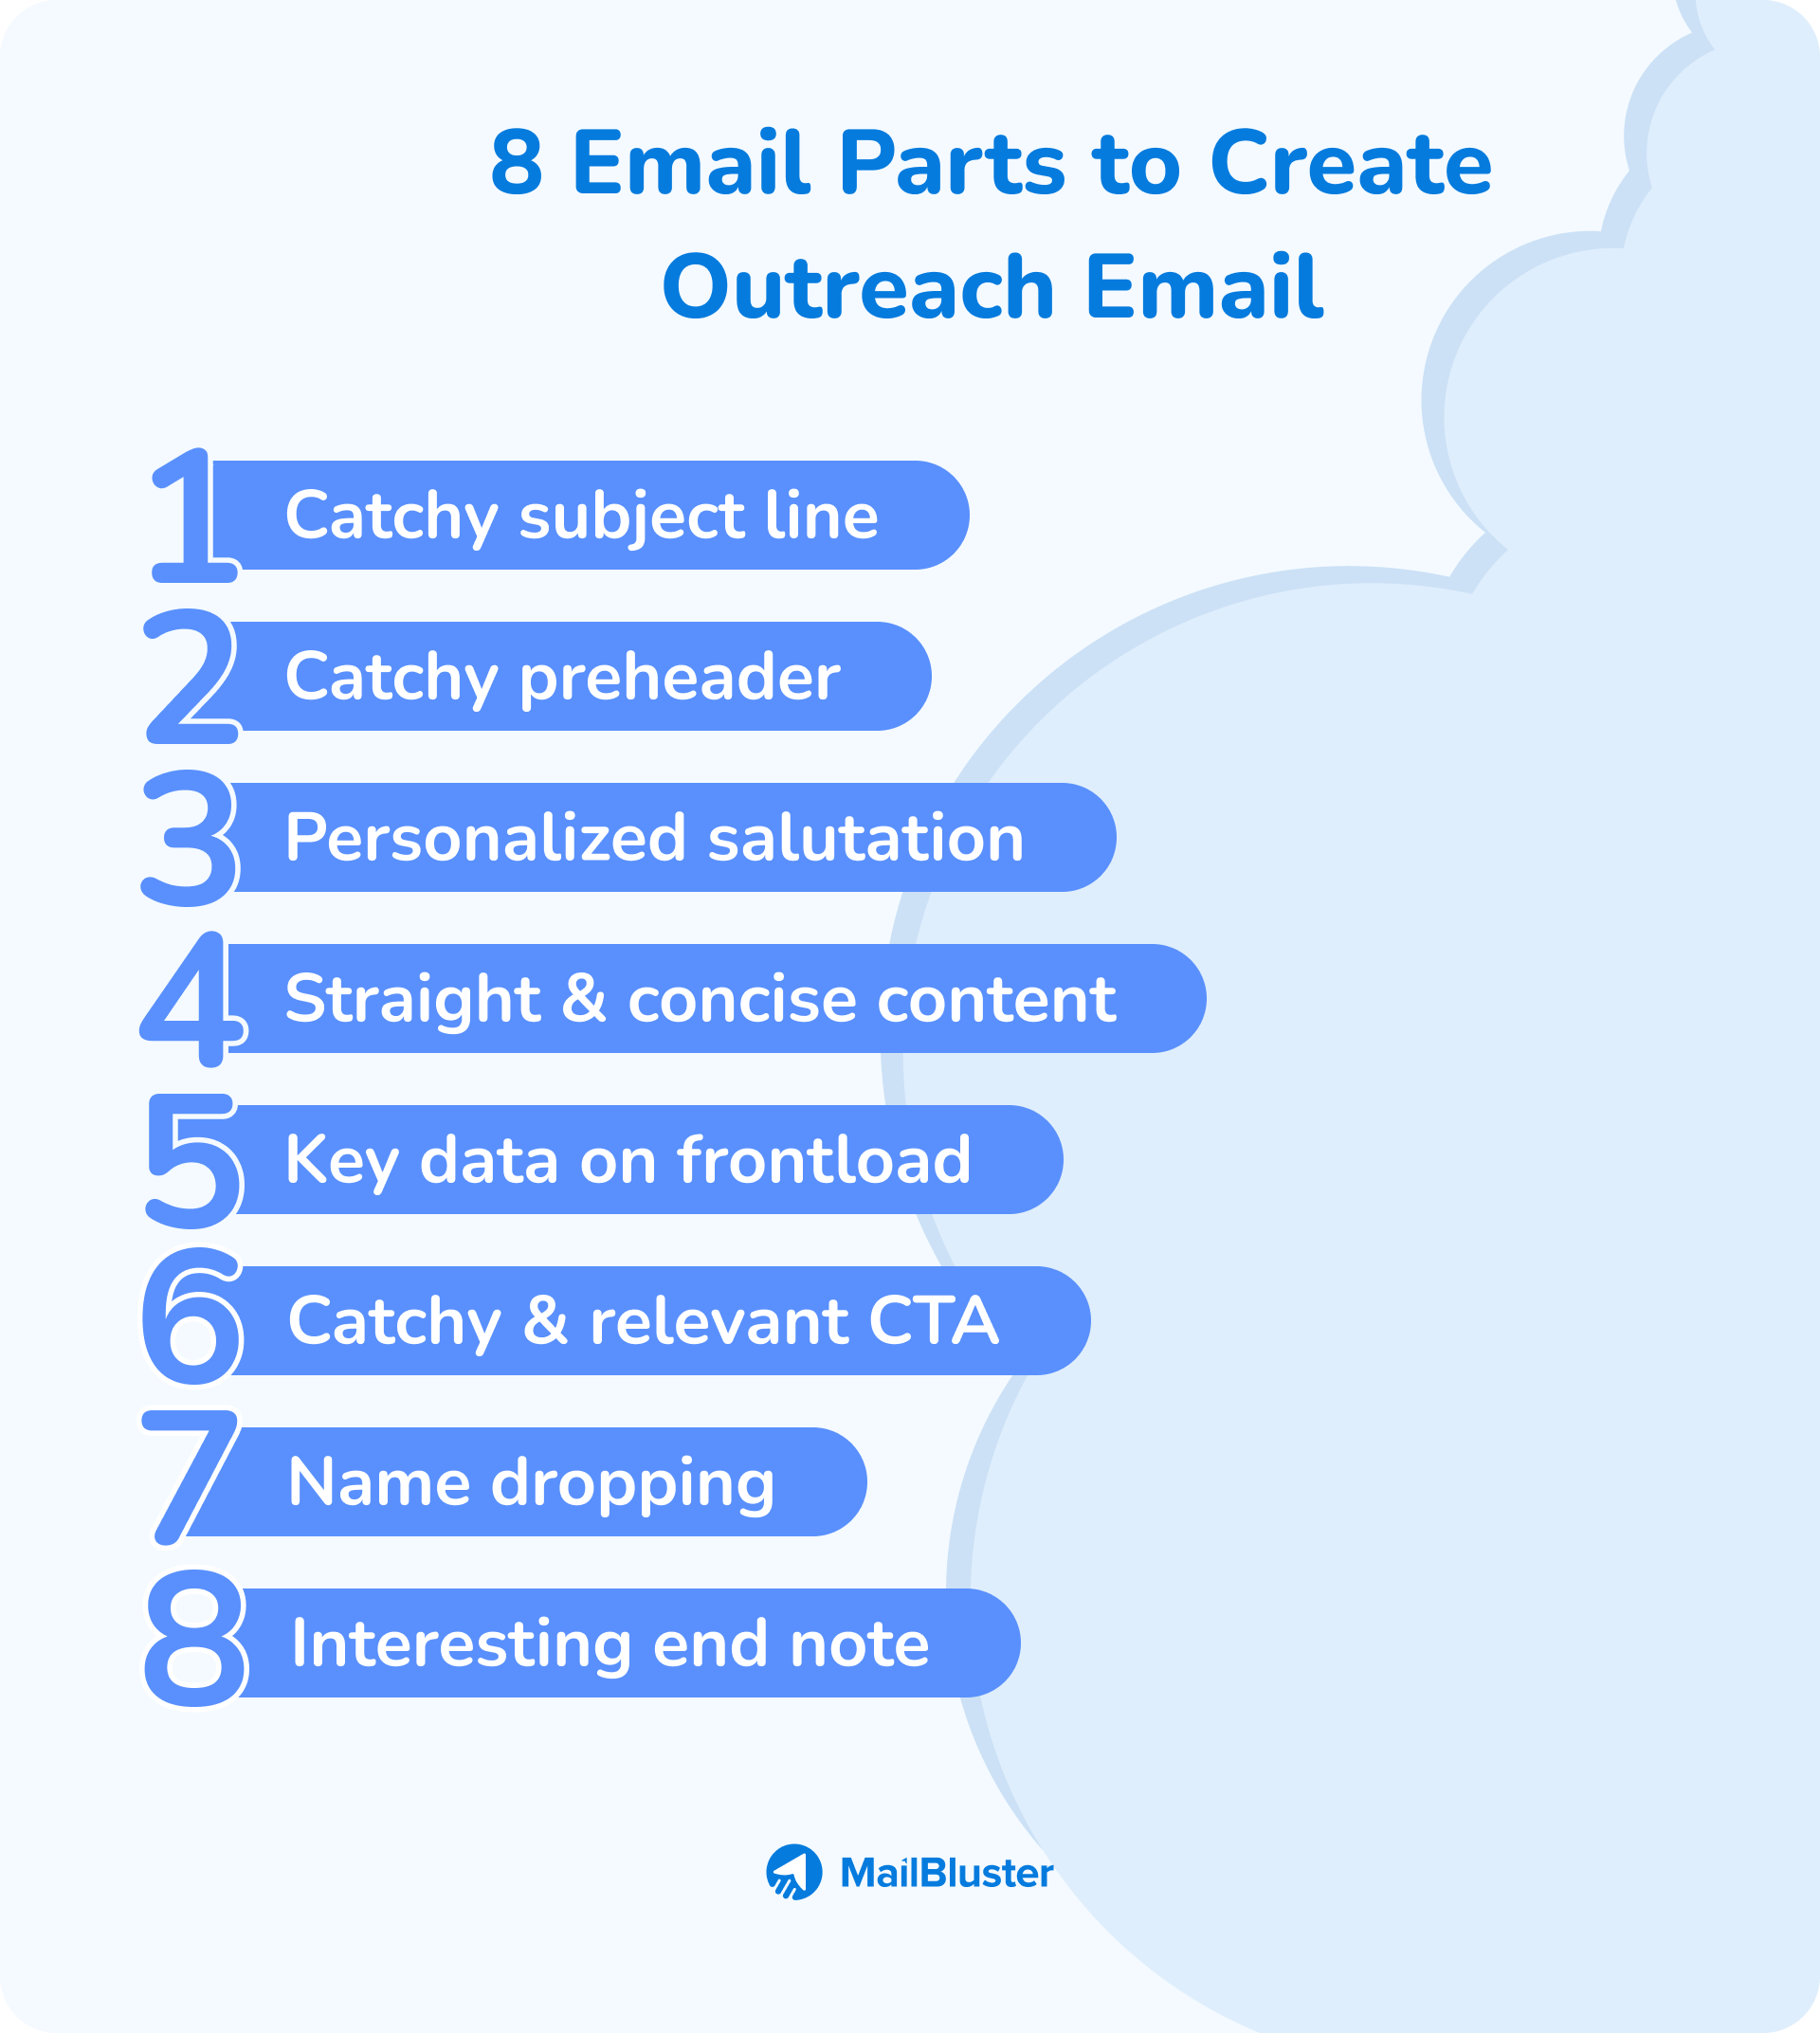 Email parts to engage a good outreach email